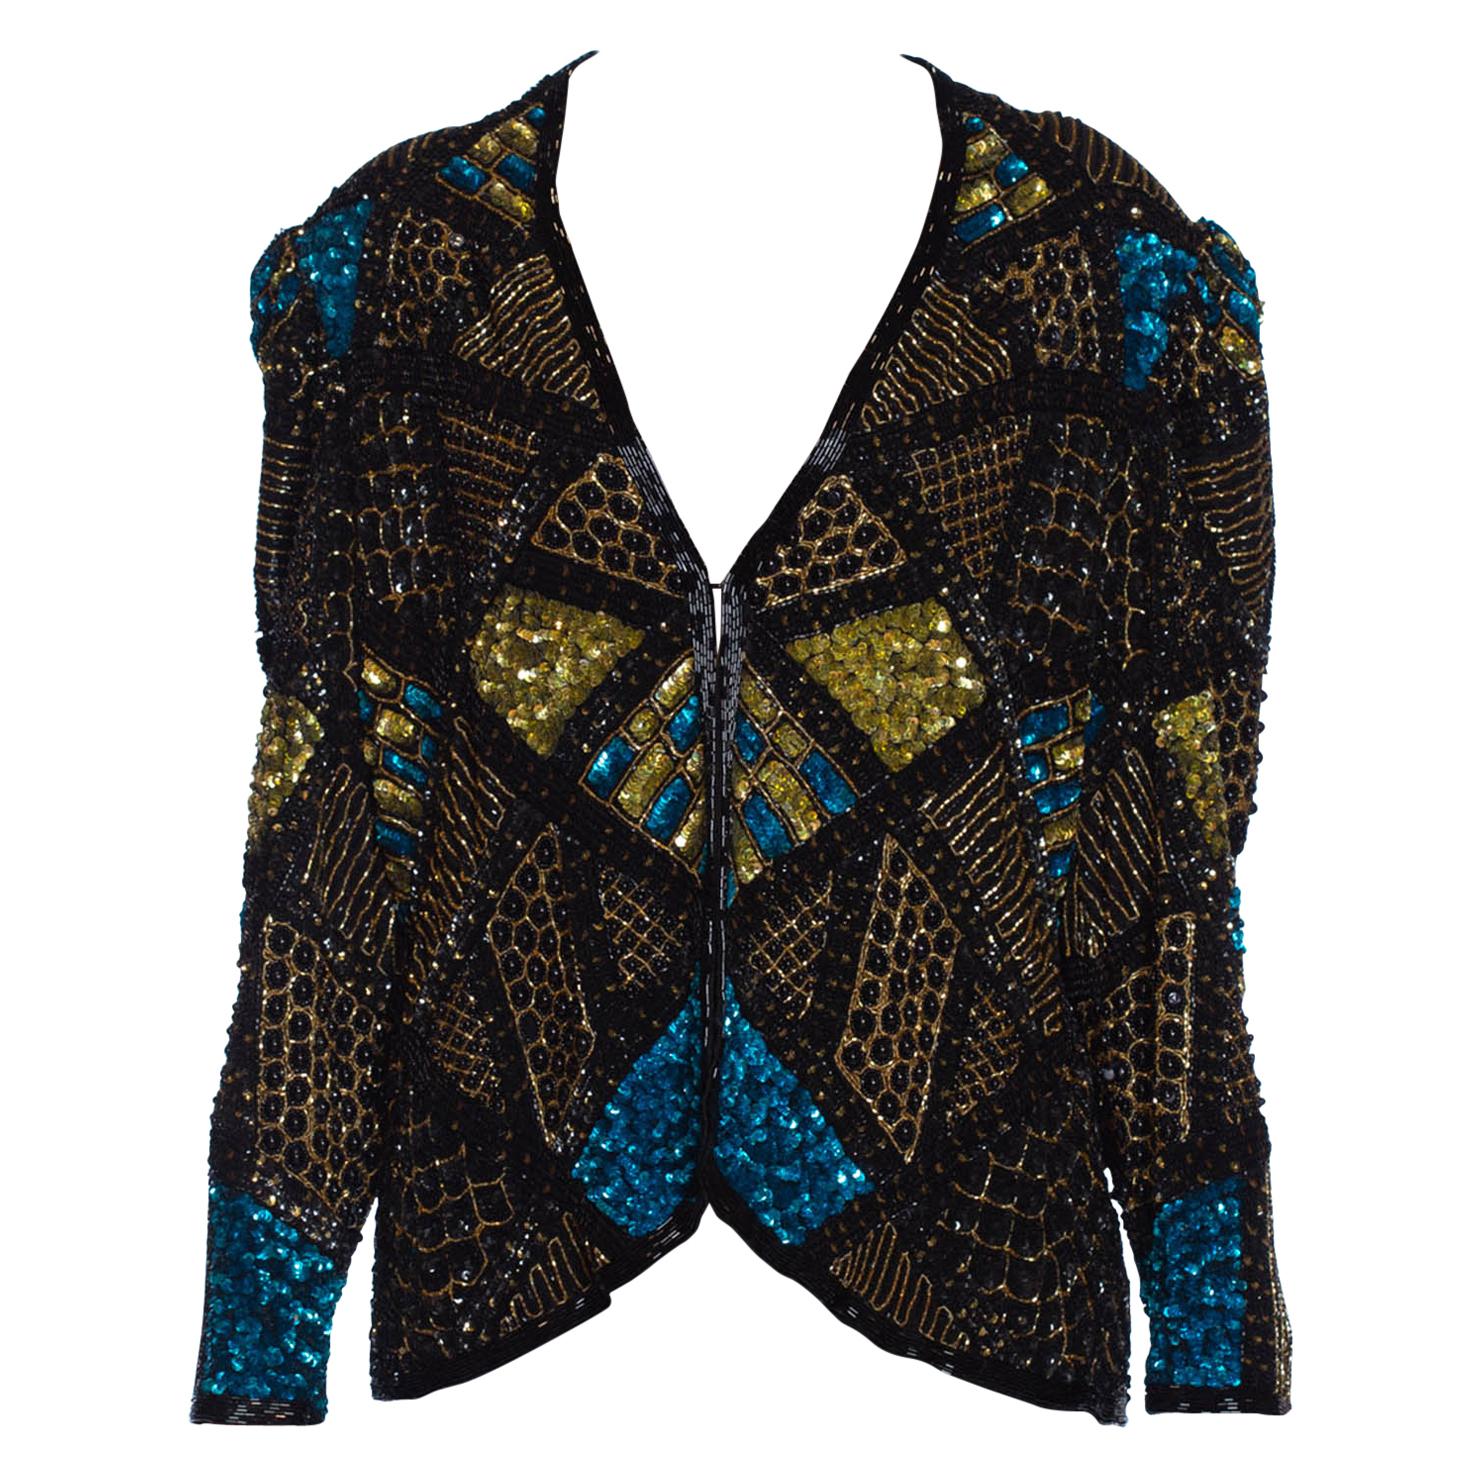 1980S Black & Gold Silk Beaded Jacket With Teal Sequin Highlights